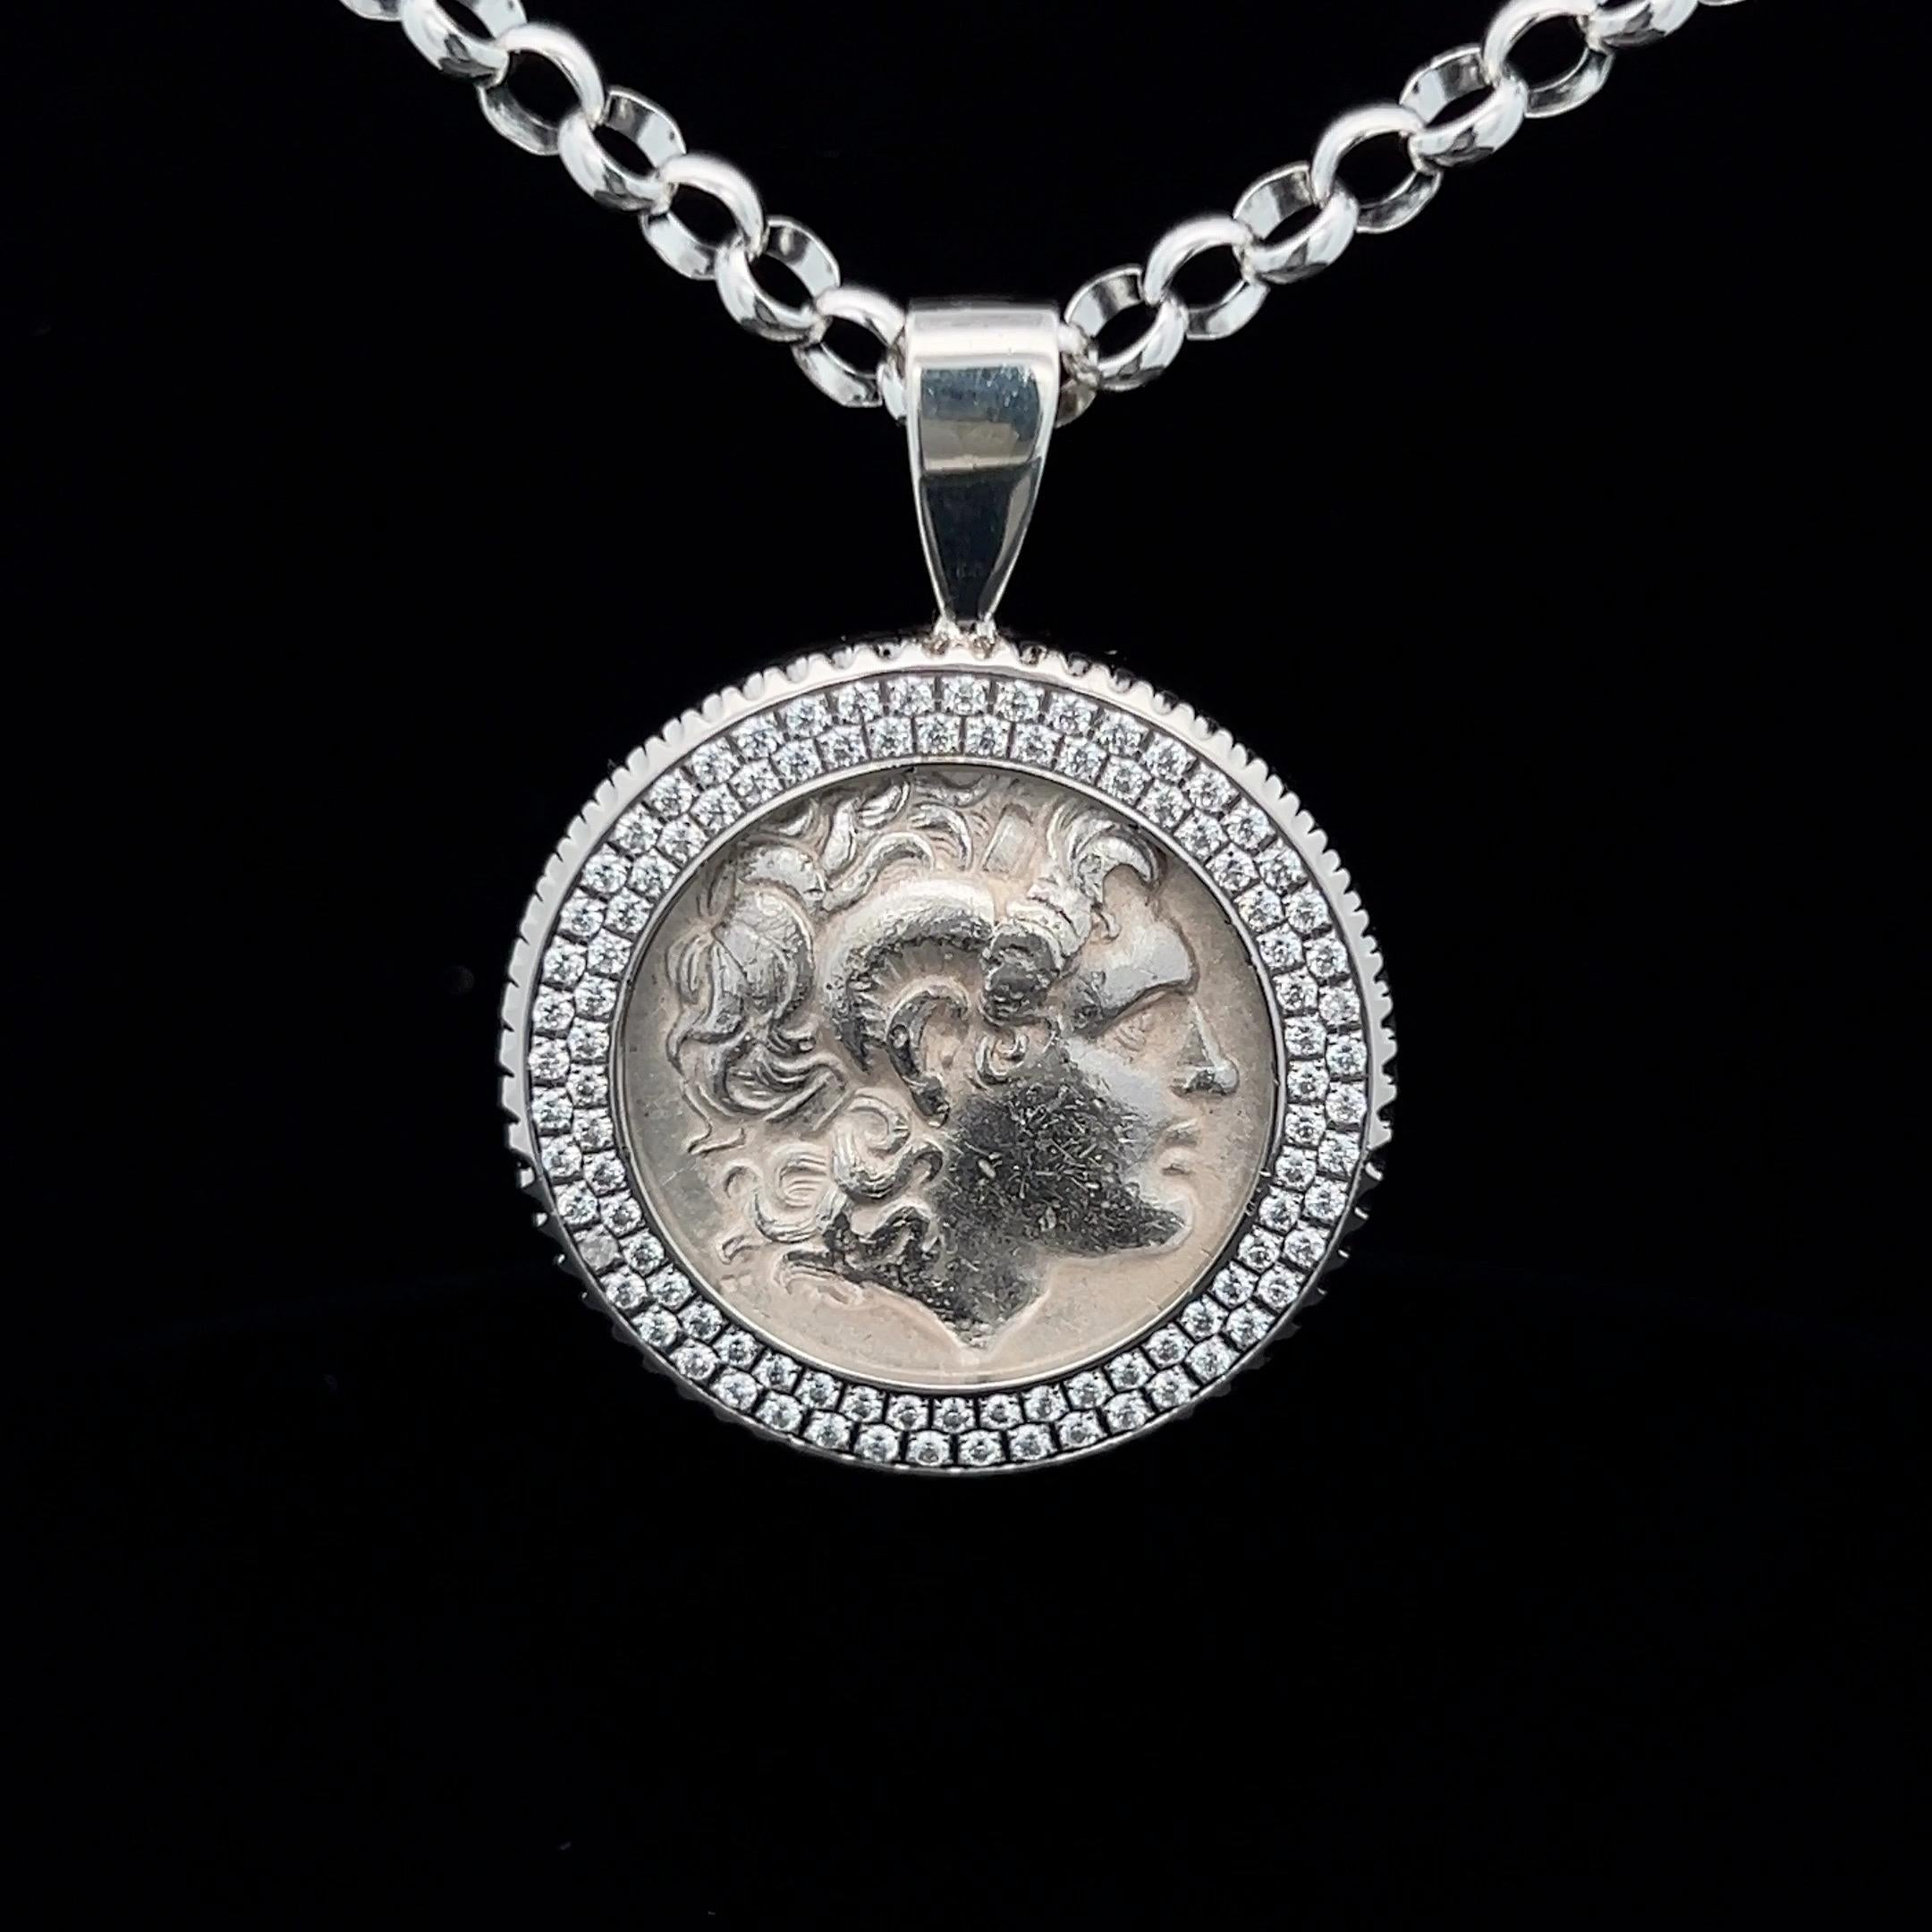 This exquisite piece of jewelry features an ancient Greek silver tetradrachm, struck for none other than the legendary Alexander the Great. Enclosed in a crystal bezel, the coin is a captivating piece that transports us back to the glory days of